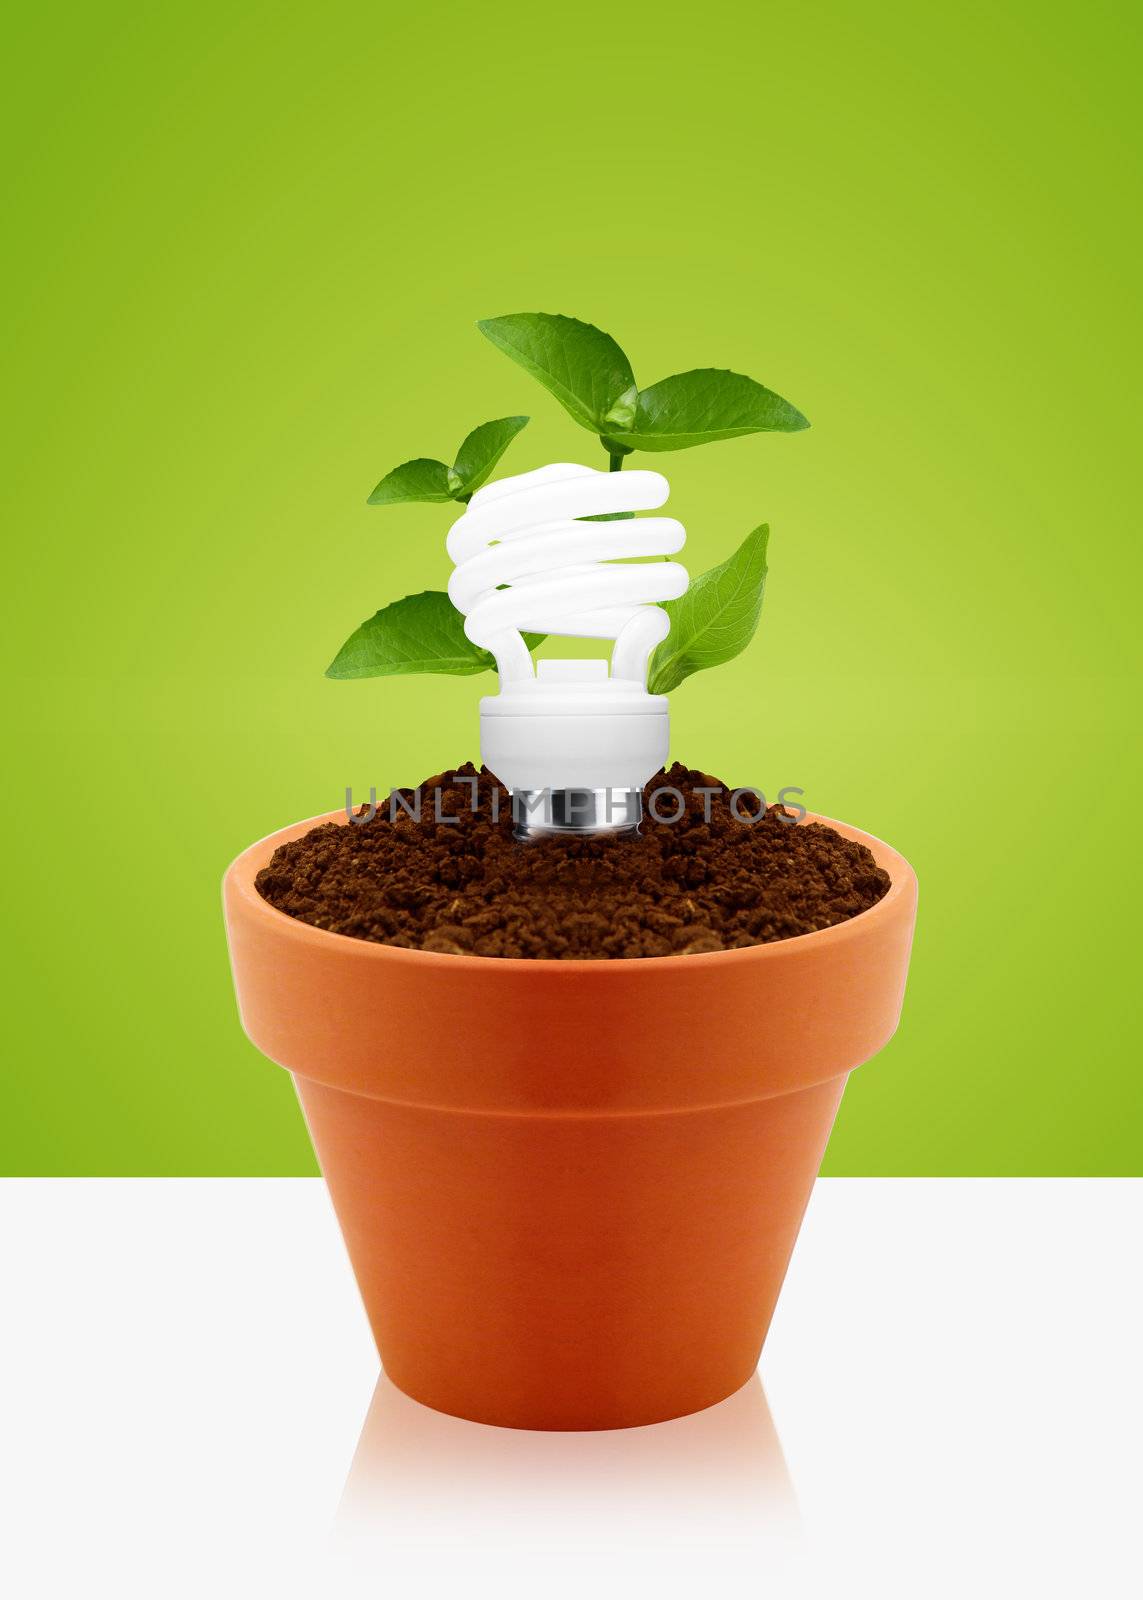 modern energy-saving concept, bright bulb in garden pot with small plant.